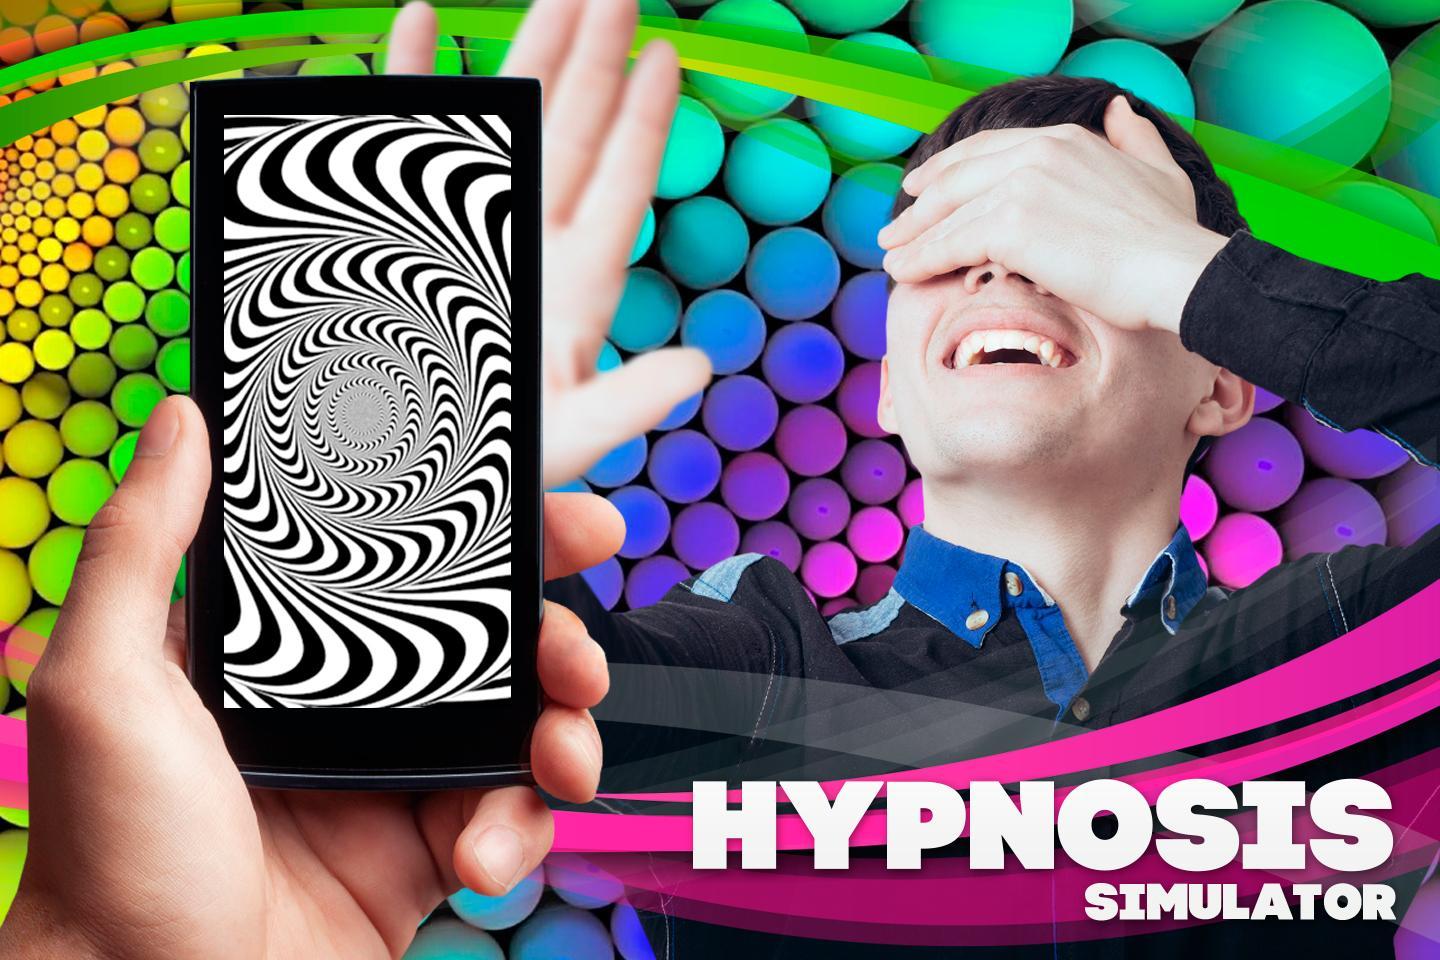 Uncle hypnosis